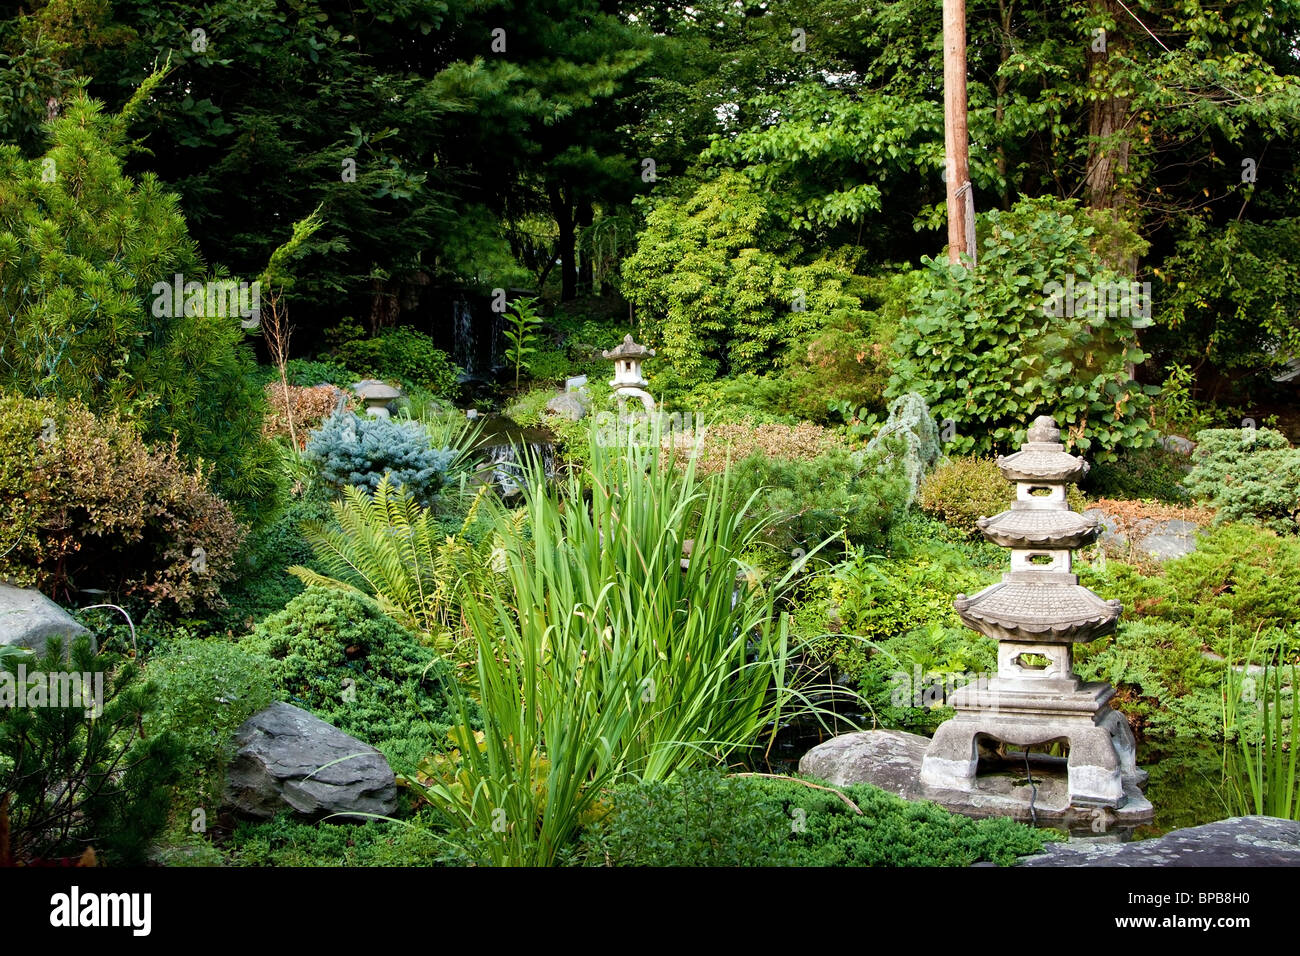 Japanese Zen Garden Used For Meditation And Relaxation Filled